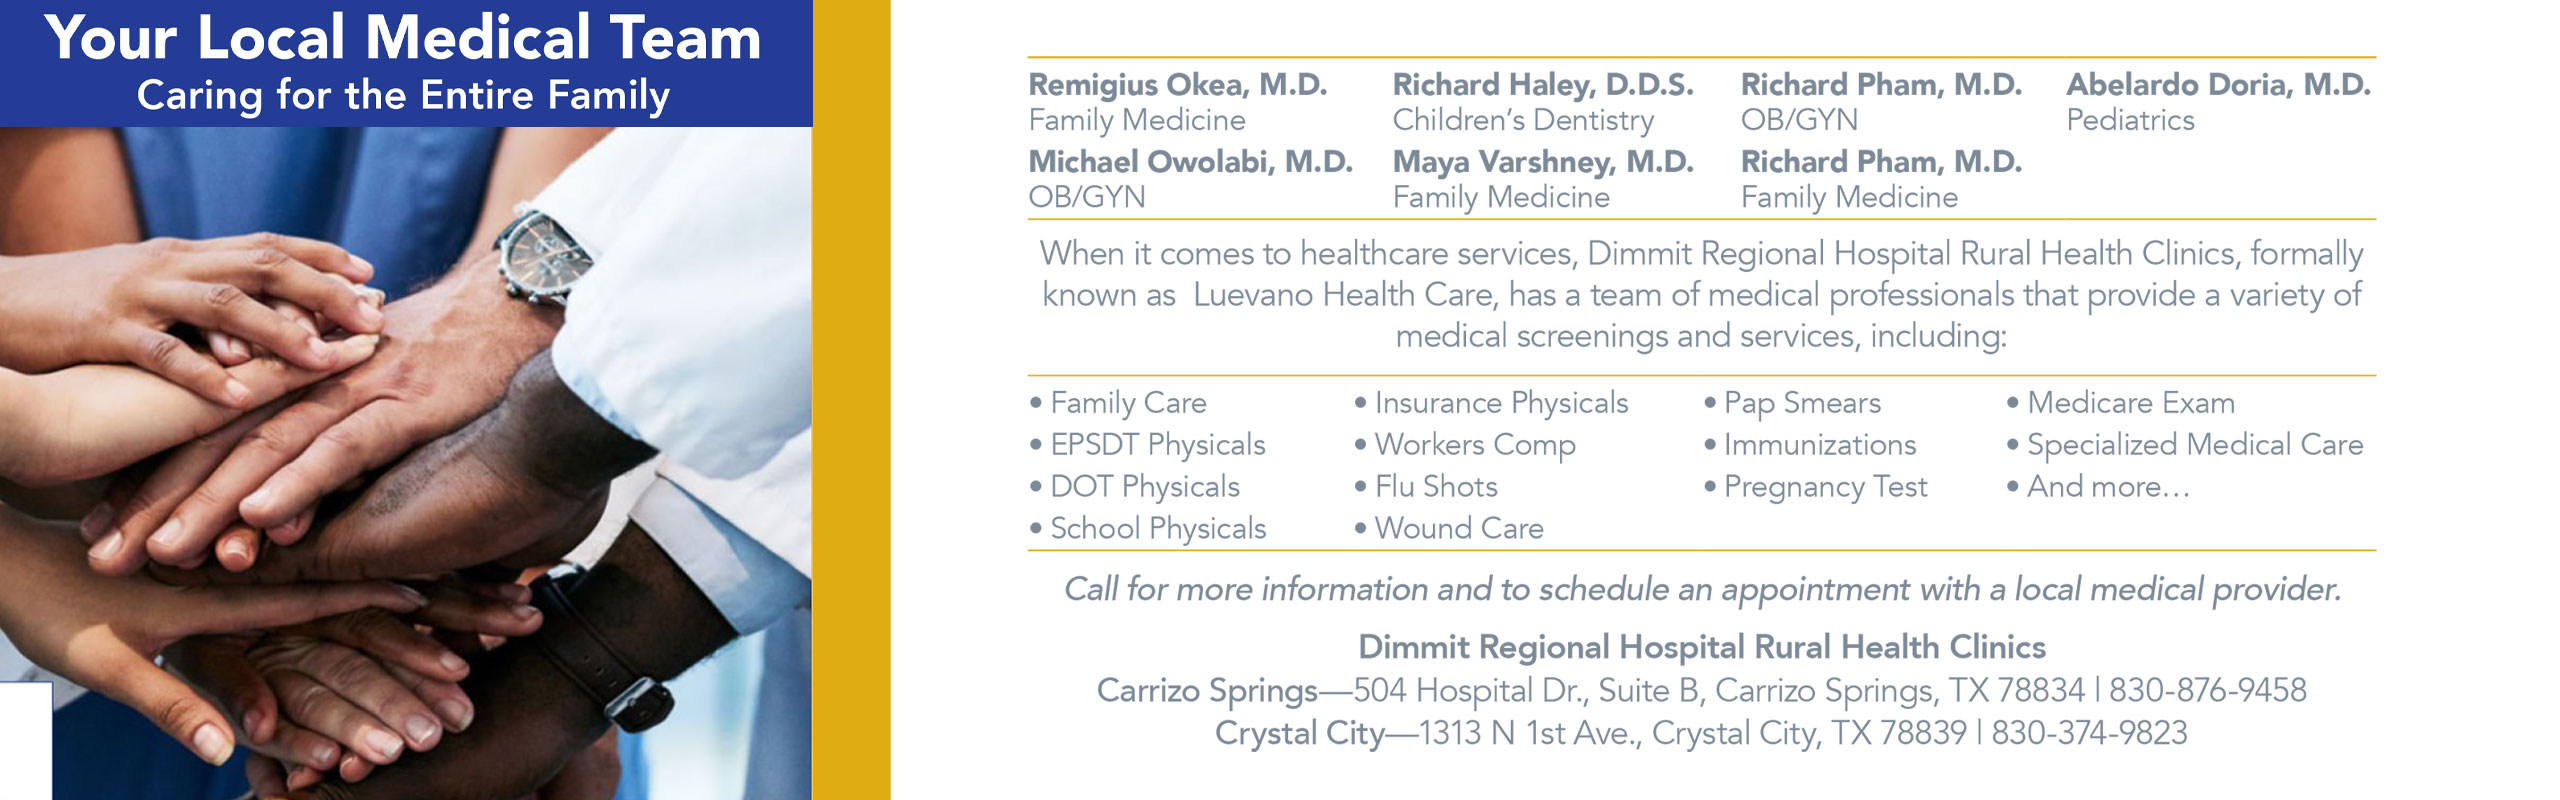 Your Local Medical Team Caring for the Entire Family

Remigius Oker, M.D. -Family Medicine
Michael Owolabi, M.D.-OB/GYN
Richard Haley, D.D.S.- Children's Dentistry
Maya Varshney M.D.- Family Medicine
Richard Pham, M.D. - OB/GYN
Richard Pham, M.D. - Family Medicine
Abelardo Doria, M.D. - Pediatrics

When it comes to healthcare services, Dimmit Regional Hospital Rural Health Clinics, formally known as Luevano Health Care, has a team of medical professionals that provide a variety of medical screenings and services, including:

Family Care, EPSDT Physicals, DOT Physicals, School Physicals, Insurance Physicals, Workers Comp, Flu Shots, Wound Care, Pap smears, Immunizations, Pregnancy Test, Medicare Exam, Specialized Medical Care, & more.

Call for more information and to schedule an appointment with a local Medical Provider.

Dimmit Regional Hospital Rural Health Clinics 

Carrizo Springs
504 Hospital Drive
Suite B
Carrizo Springs, TX 78834
830-374-9458

Crystal City
1313 N 1st Ave.
Crystal City, TX 78839
830-374-9823